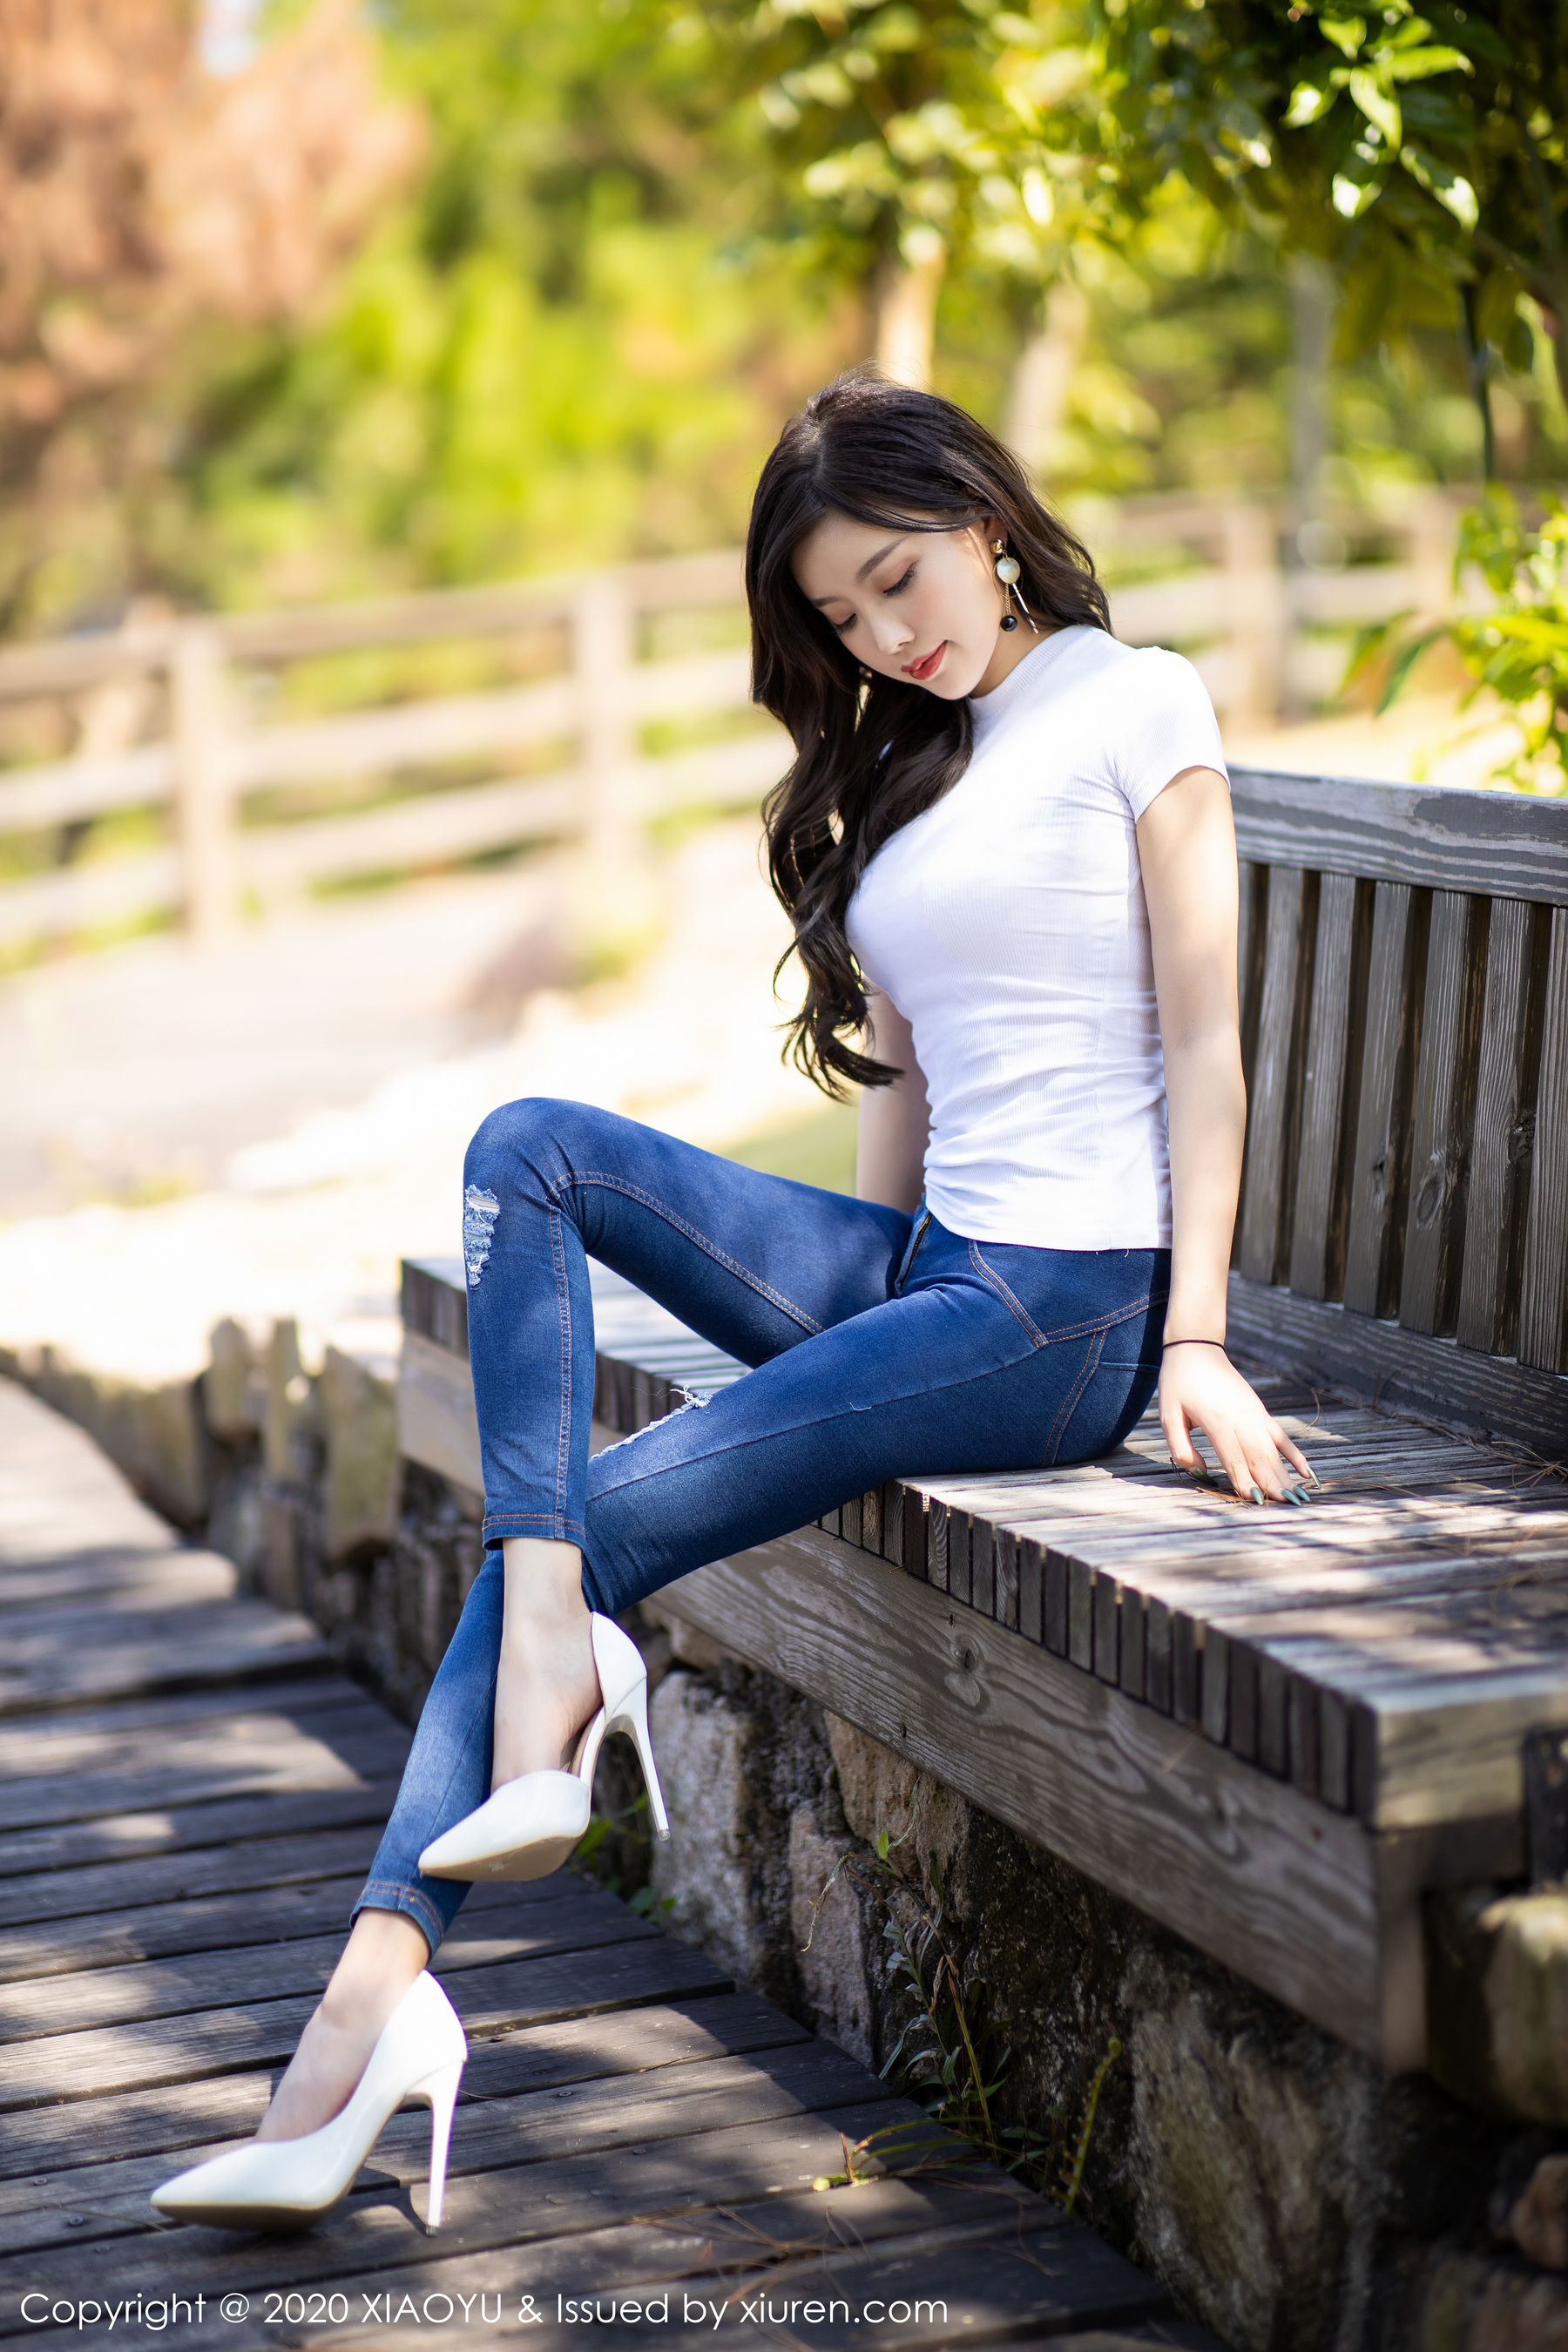 [LangkhaIxia XIAOYU] Vol.300 Yang Chenchen Sugar “The best body under jeans” photo collection